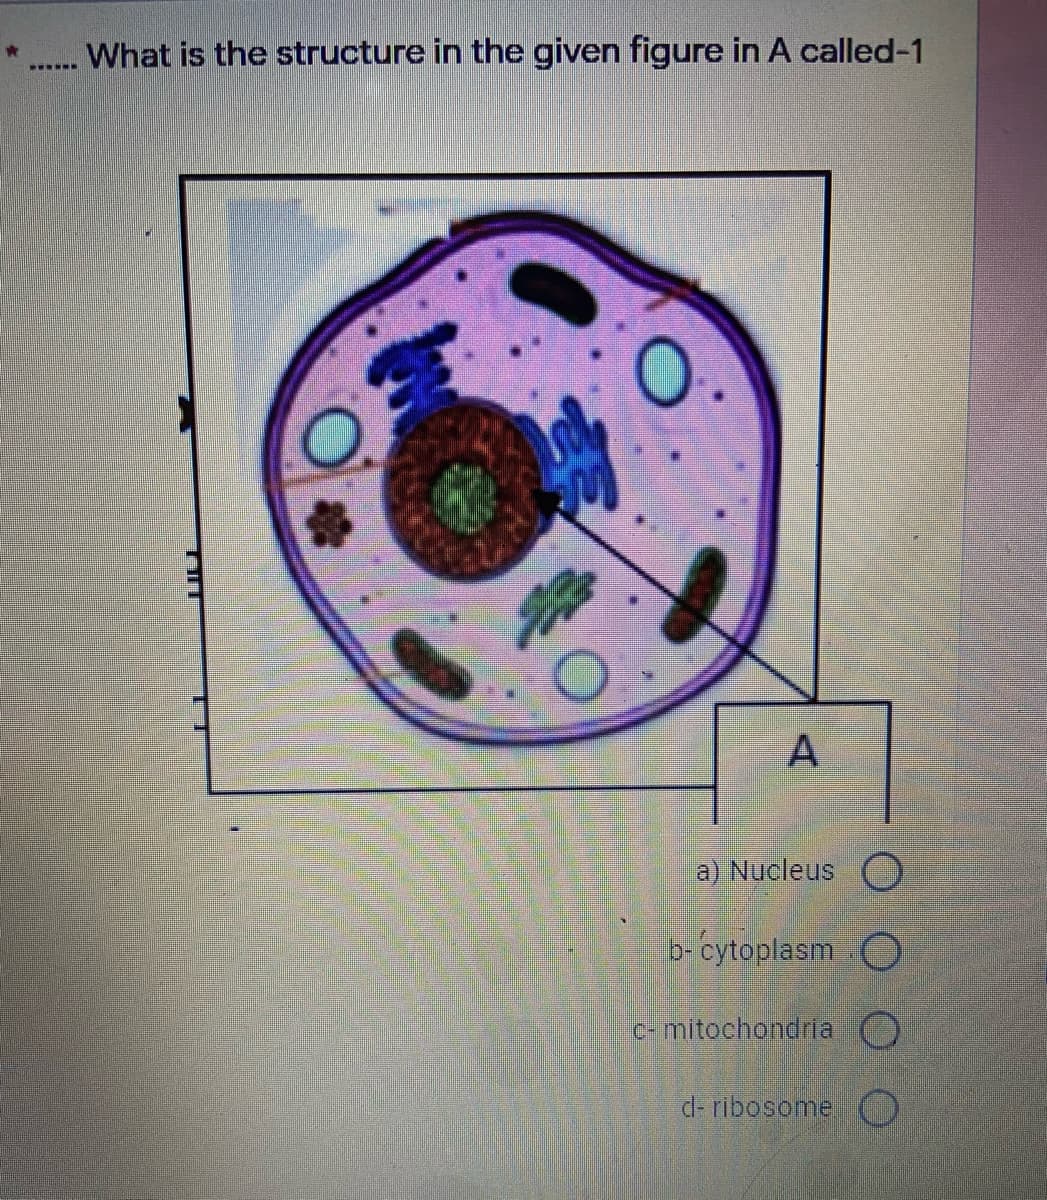 What is the structure in the given figure in A called-1
A
a) Nucleus O
b-cytoplasm C
e-mitochondria )
d- ribosome O
TIIT
